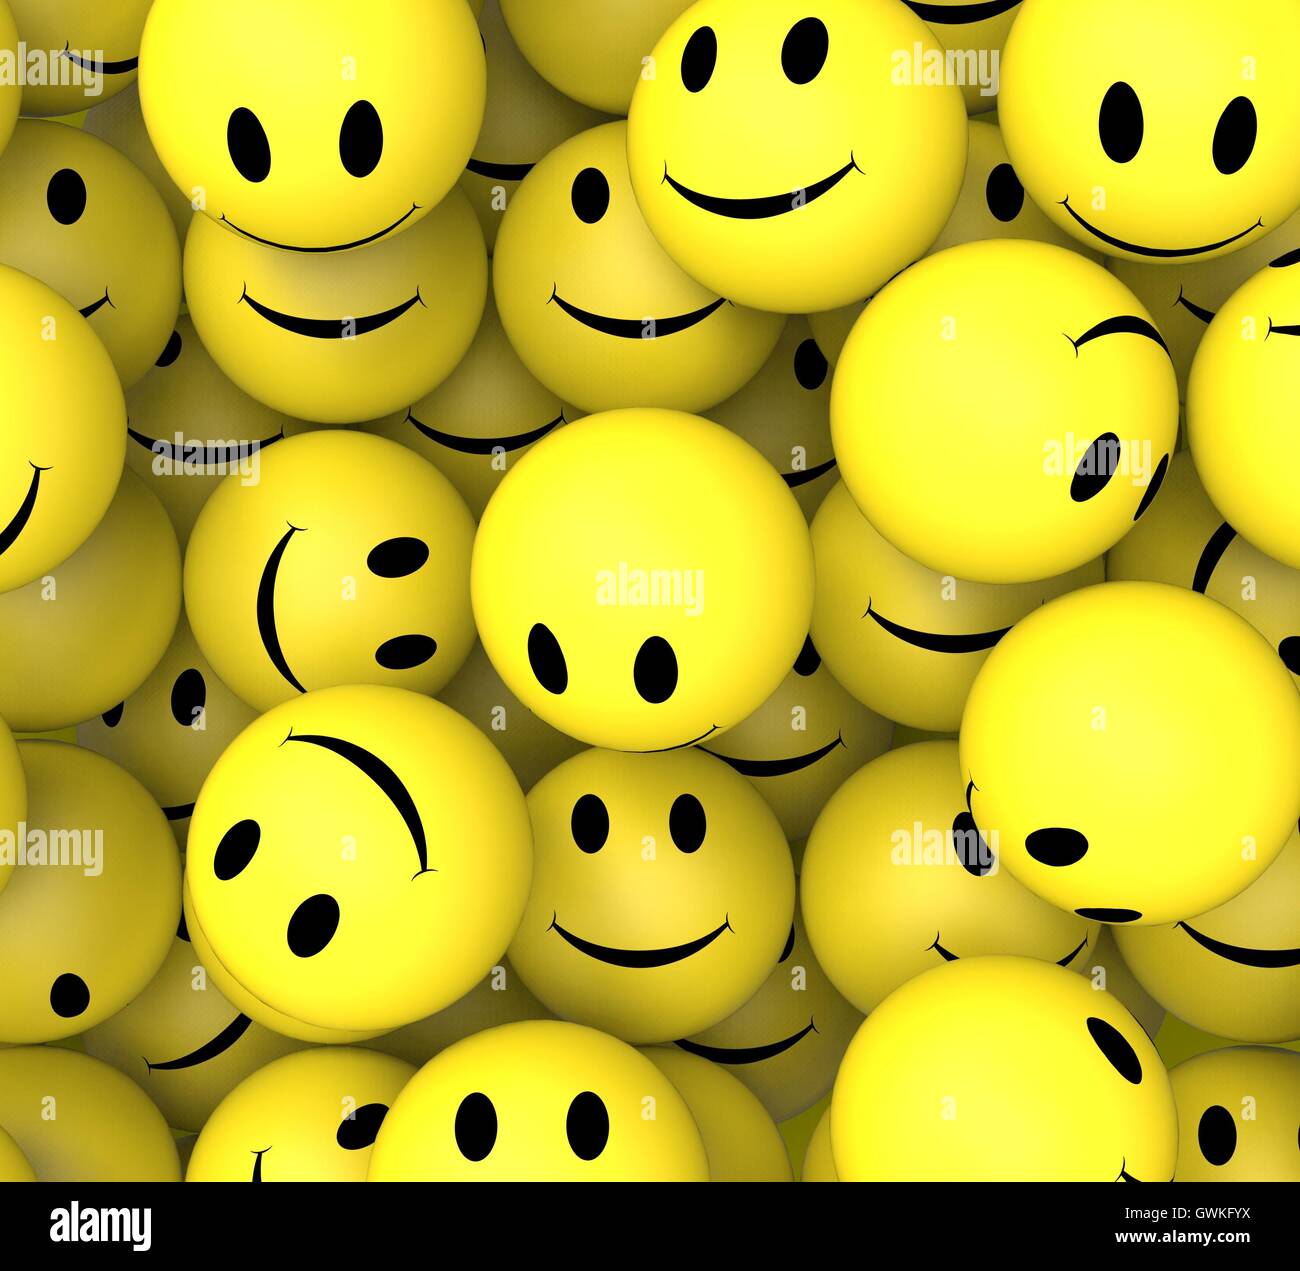 Smileys Showing Happy Cheerful Faces Stock Photo